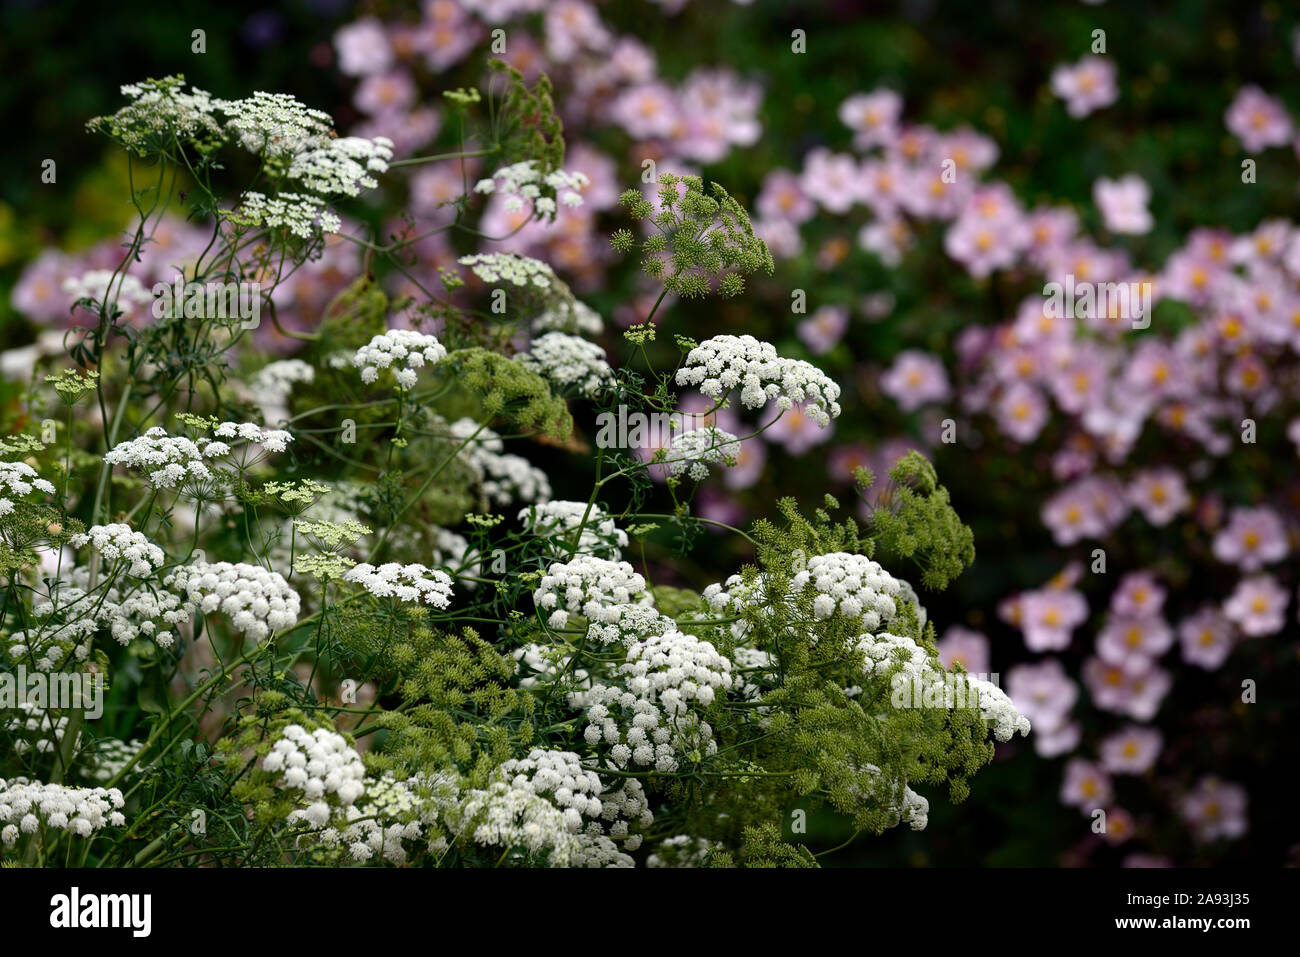 anemone japonica,ammi majus,queen anne's lace,,flowers,flower,flowering,white,pink,mix,mixed,combination,spiiling over path,RM Floral Stock Photo